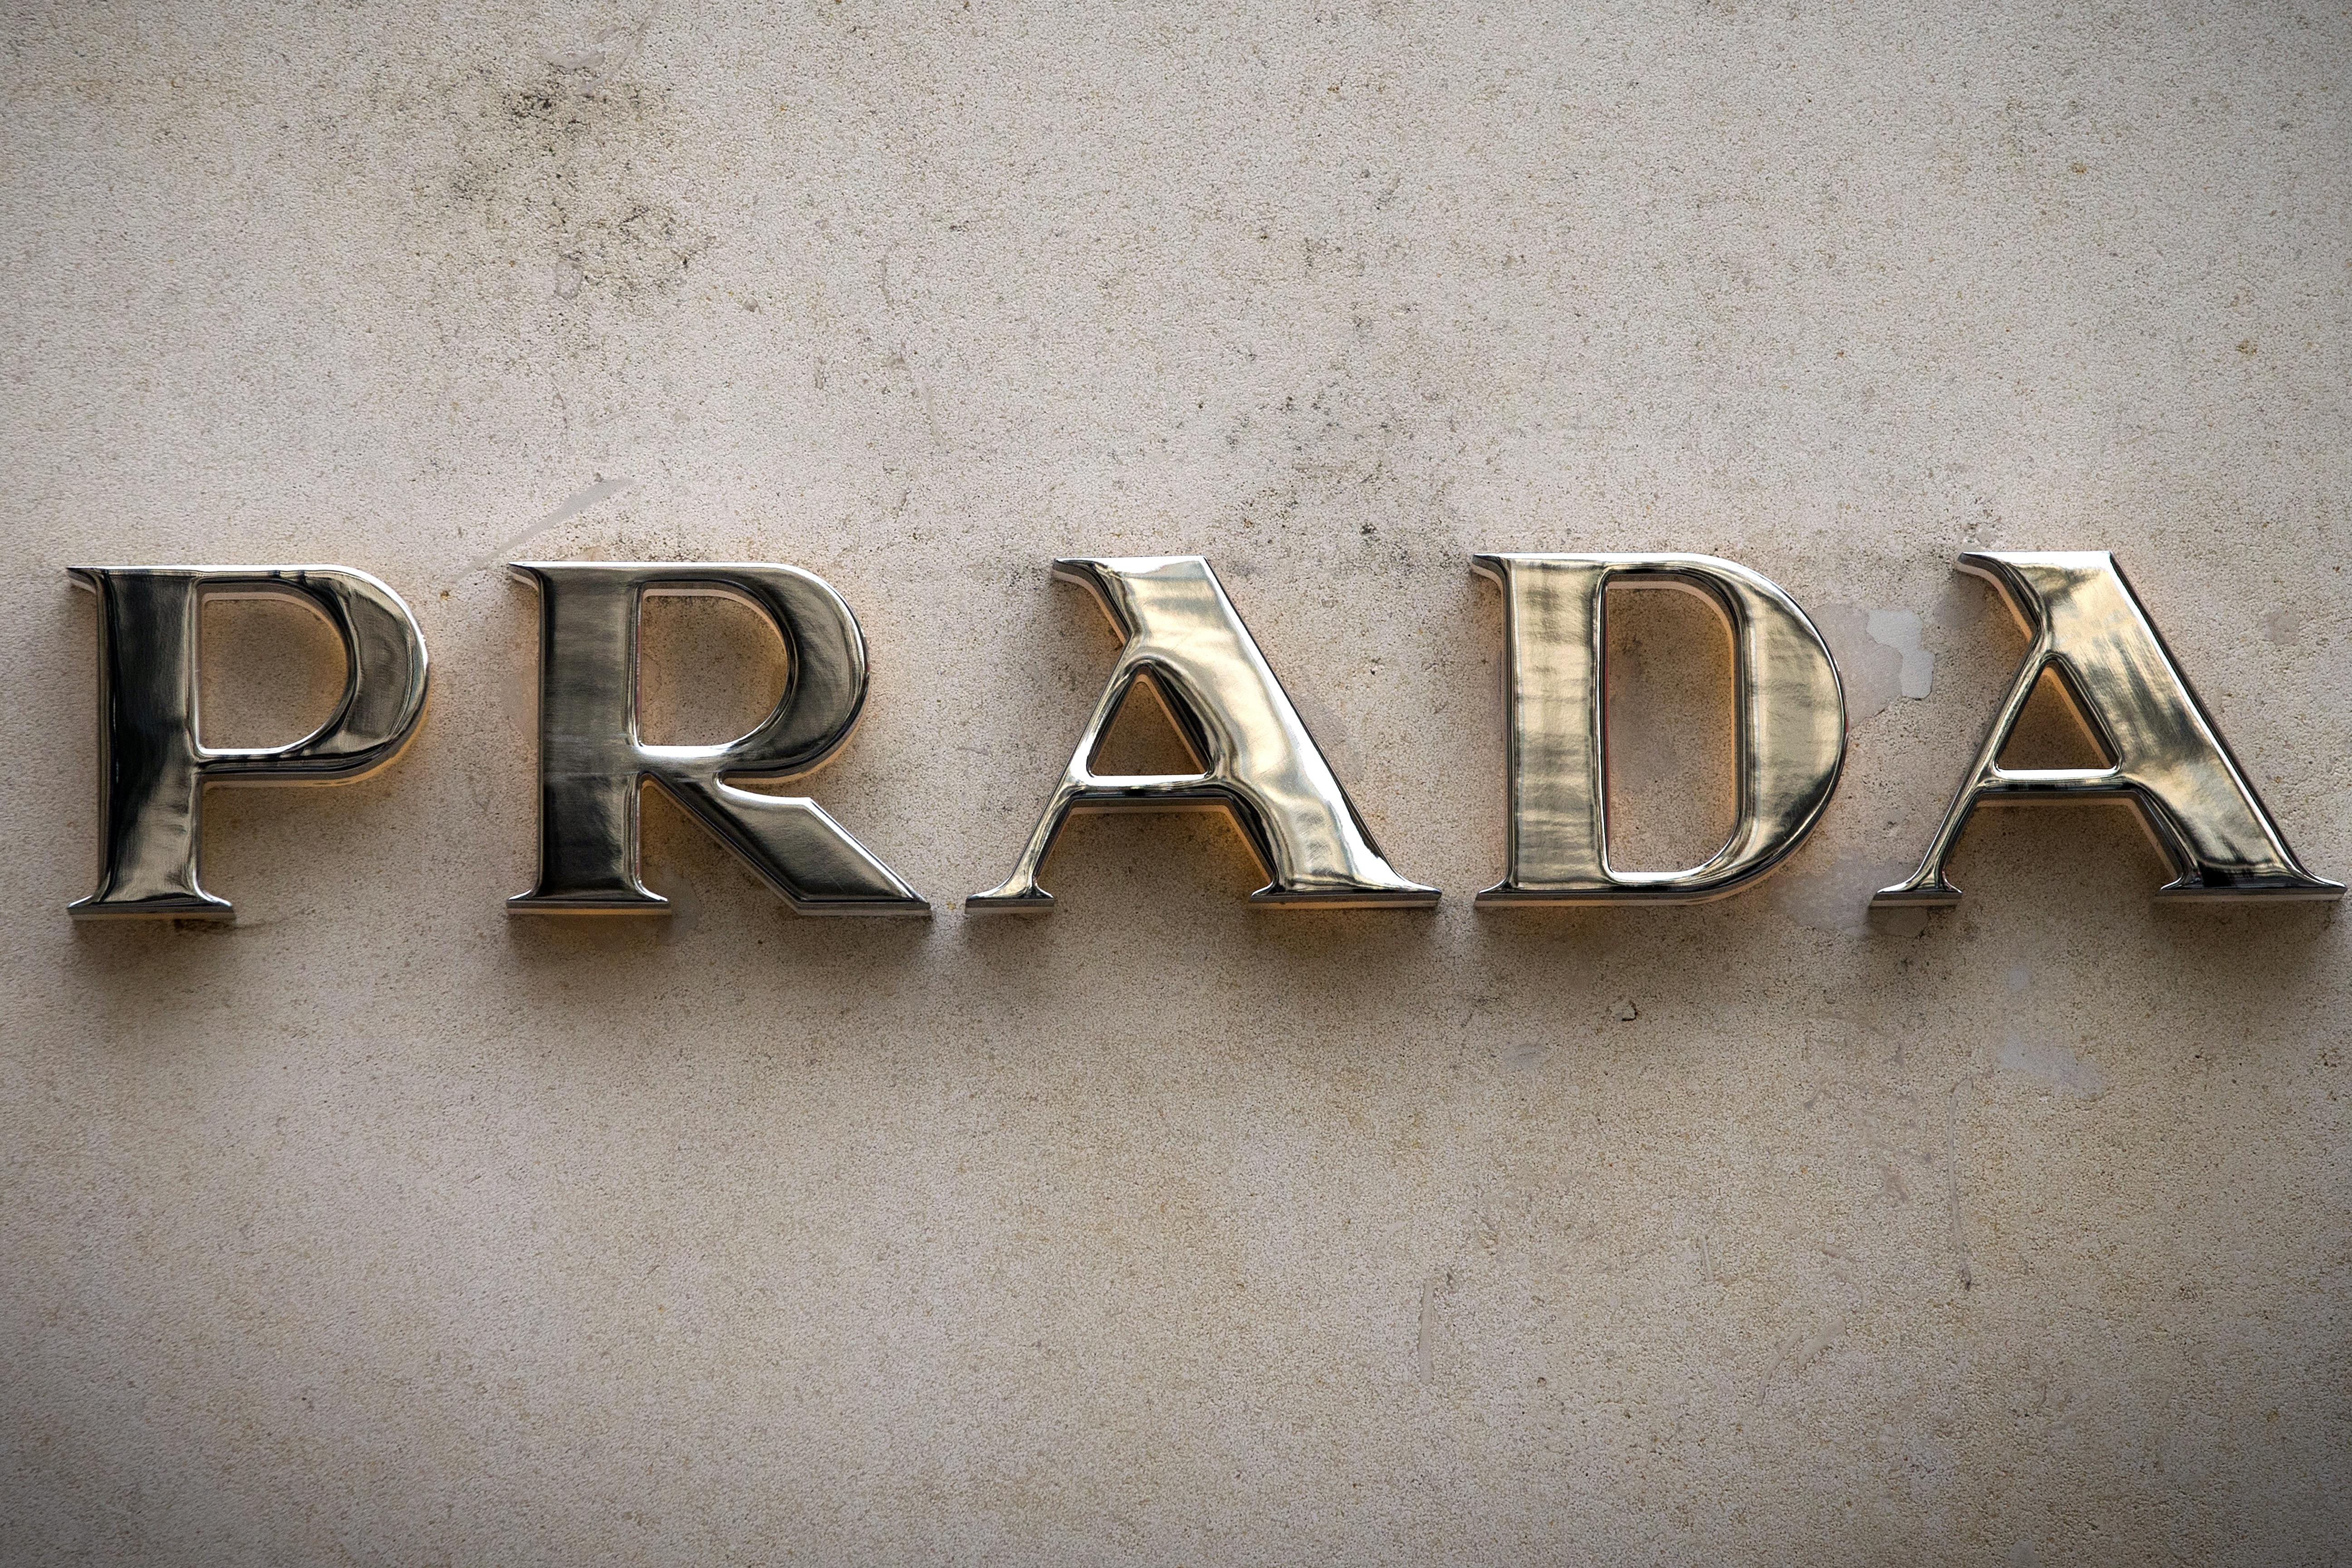 Gold letters Prada wallpaper and image, picture, photo